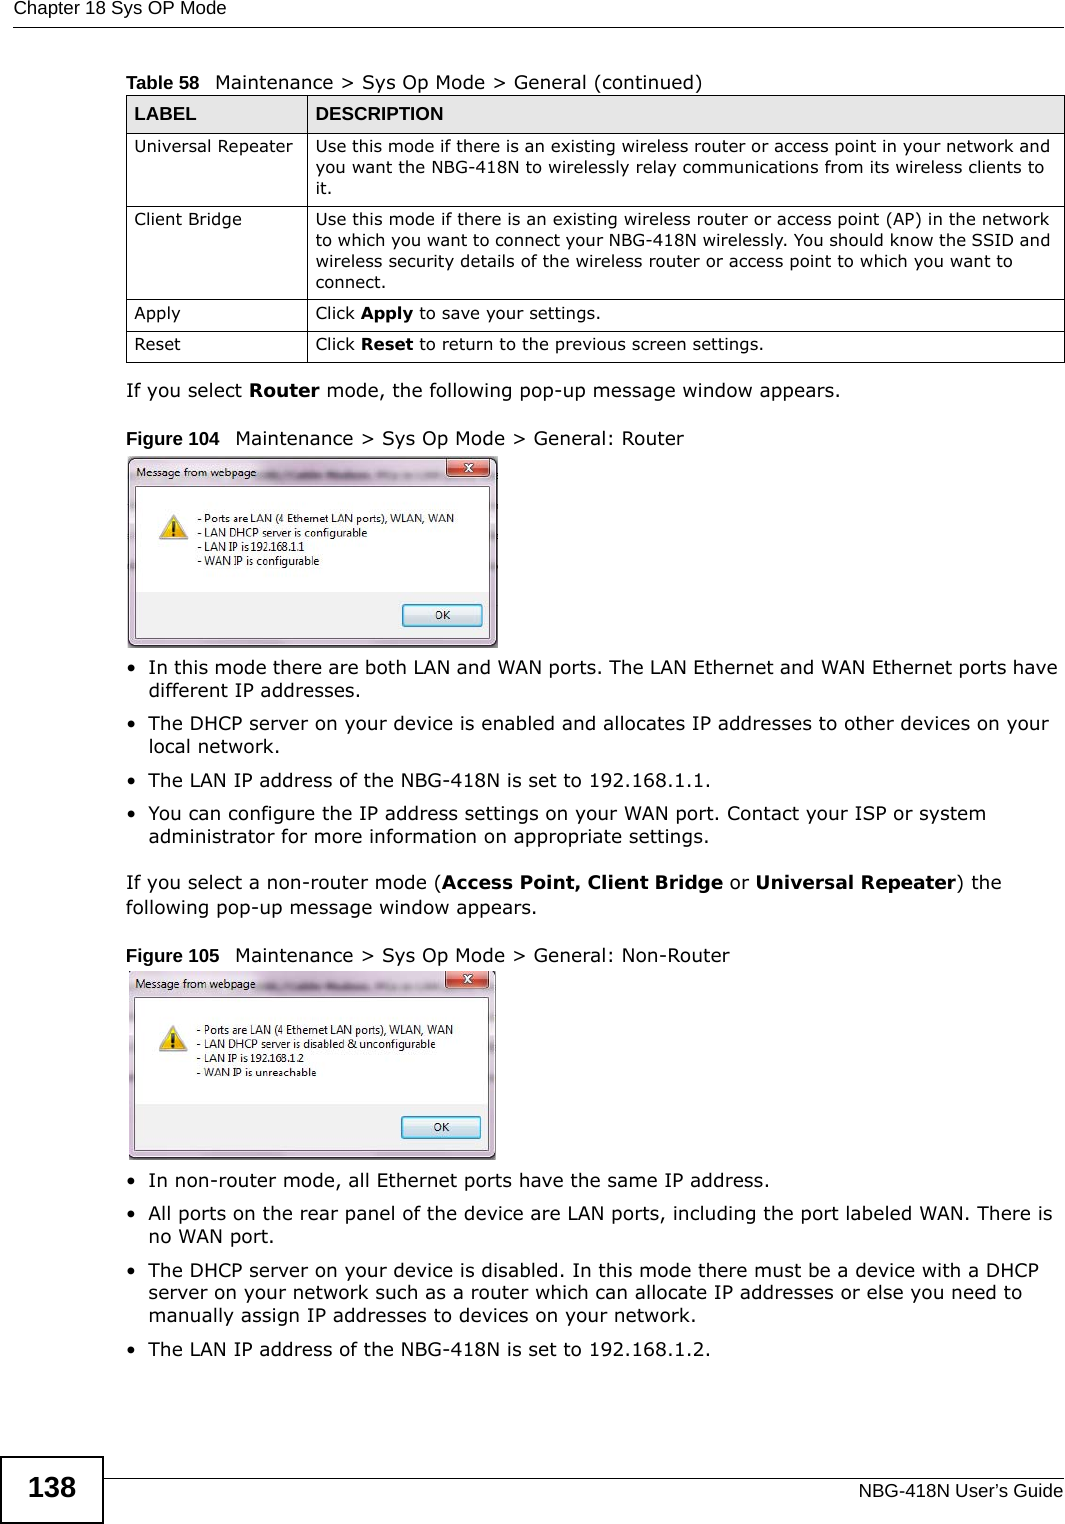 Chapter 18 Sys OP ModeNBG-418N User’s Guide138If you select Router mode, the following pop-up message window appears.Figure 104   Maintenance &gt; Sys Op Mode &gt; General: Router • In this mode there are both LAN and WAN ports. The LAN Ethernet and WAN Ethernet ports have different IP addresses. • The DHCP server on your device is enabled and allocates IP addresses to other devices on your local network. • The LAN IP address of the NBG-418N is set to 192.168.1.1.• You can configure the IP address settings on your WAN port. Contact your ISP or system administrator for more information on appropriate settings.If you select a non-router mode (Access Point, Client Bridge or Universal Repeater) the following pop-up message window appears.Figure 105   Maintenance &gt; Sys Op Mode &gt; General: Non-Router • In non-router mode, all Ethernet ports have the same IP address. • All ports on the rear panel of the device are LAN ports, including the port labeled WAN. There is no WAN port.• The DHCP server on your device is disabled. In this mode there must be a device with a DHCP server on your network such as a router which can allocate IP addresses or else you need to manually assign IP addresses to devices on your network.• The LAN IP address of the NBG-418N is set to 192.168.1.2.Universal Repeater Use this mode if there is an existing wireless router or access point in your network and you want the NBG-418N to wirelessly relay communications from its wireless clients to it.Client Bridge Use this mode if there is an existing wireless router or access point (AP) in the network to which you want to connect your NBG-418N wirelessly. You should know the SSID and wireless security details of the wireless router or access point to which you want to connect.Apply Click Apply to save your settings.Reset Click Reset to return to the previous screen settings.Table 58   Maintenance &gt; Sys Op Mode &gt; General (continued)LABEL DESCRIPTION